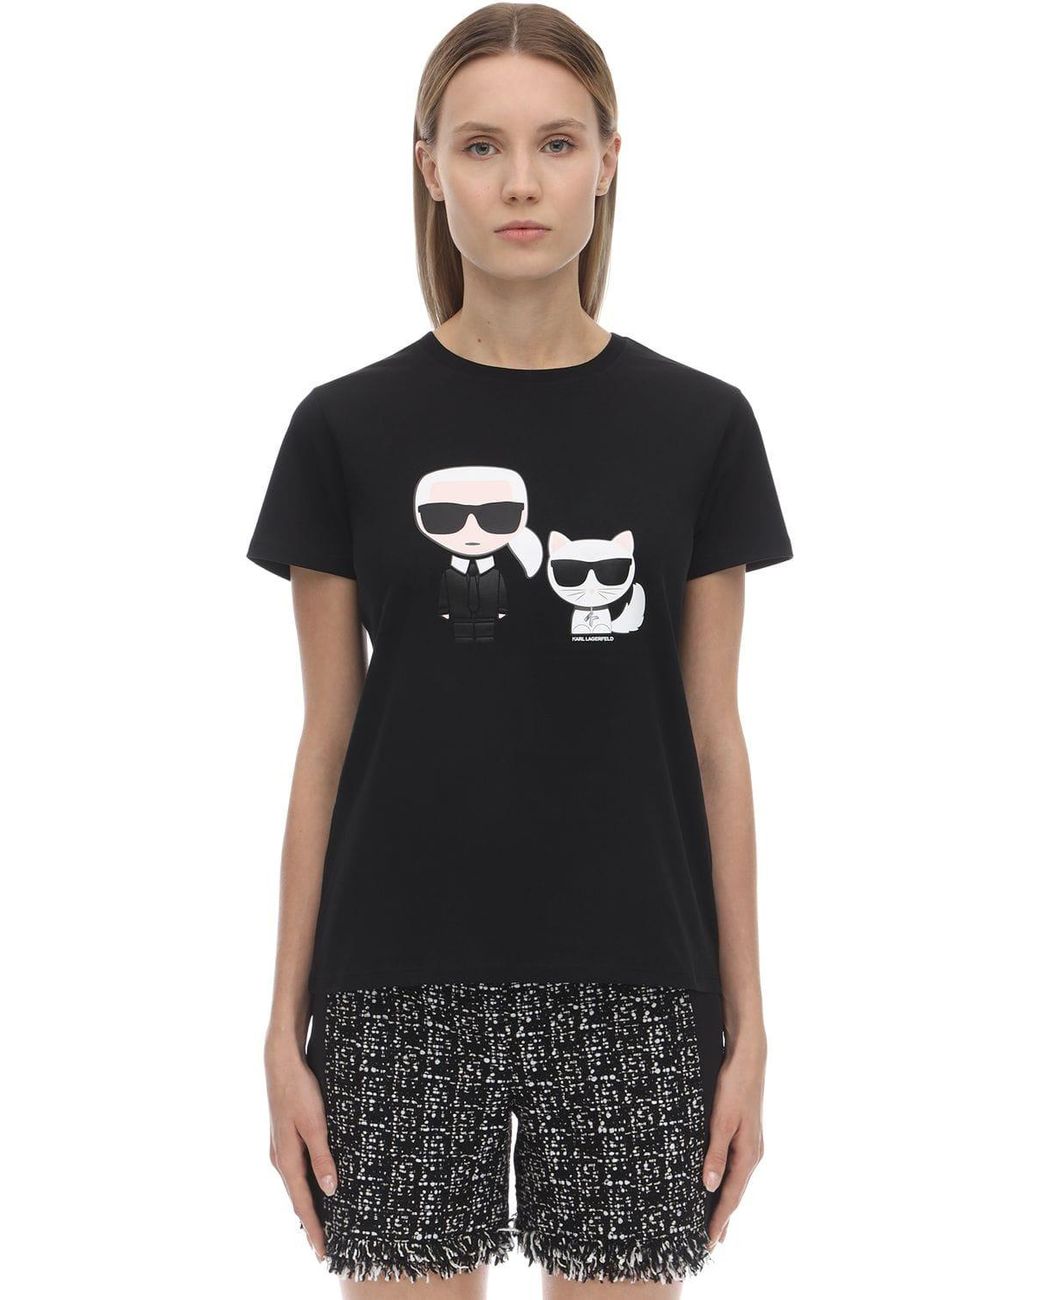 Karl Lagerfeld Printed Cotton Jersey T-shirt in Black - Save 15% - Lyst